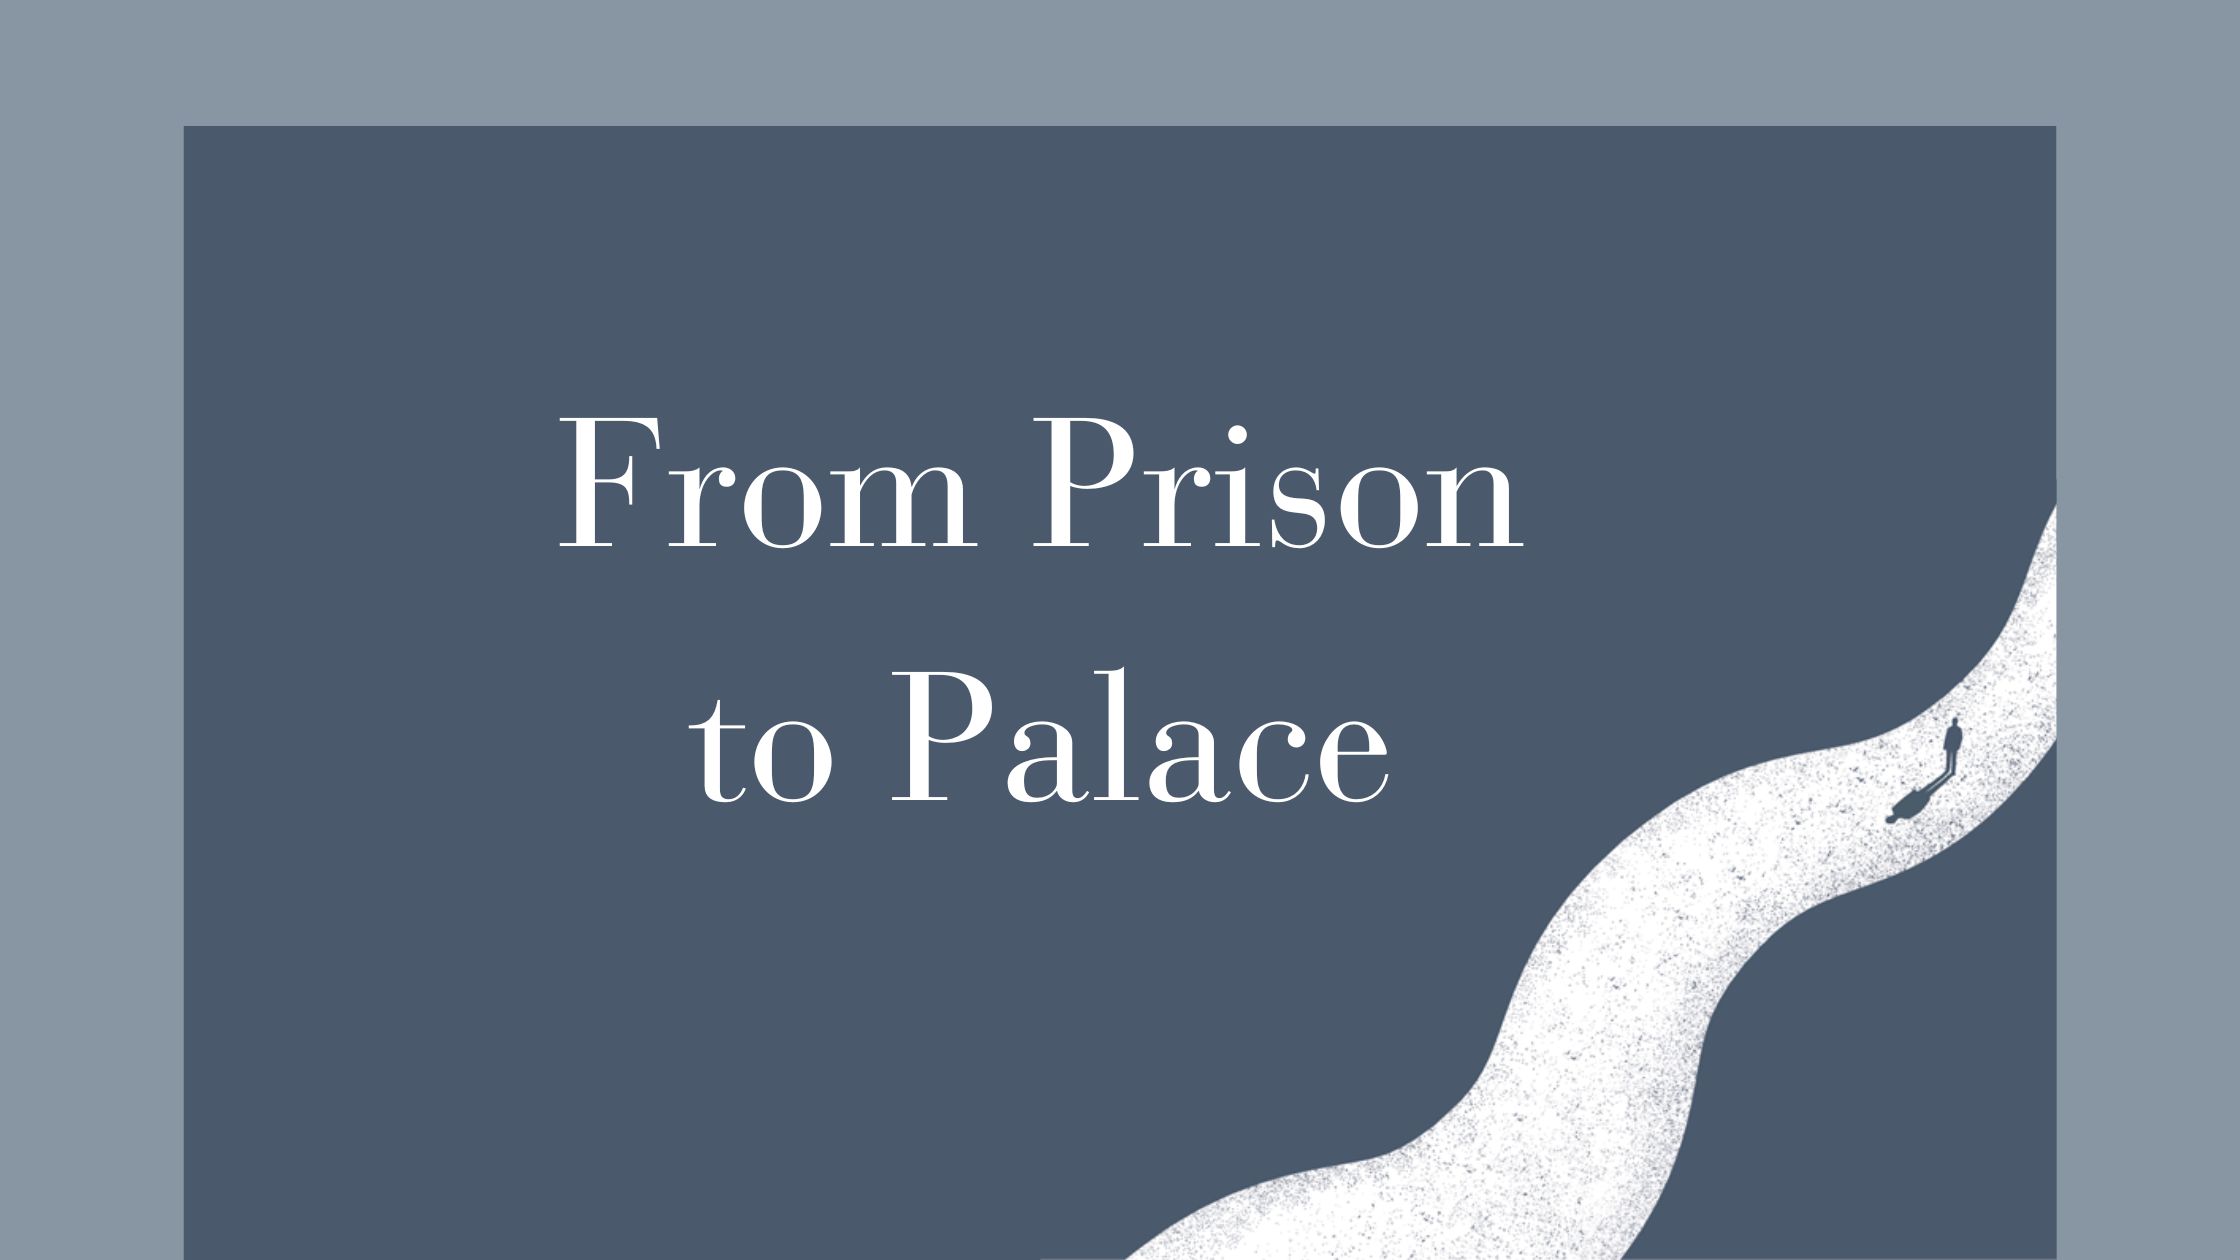 From prison to palace